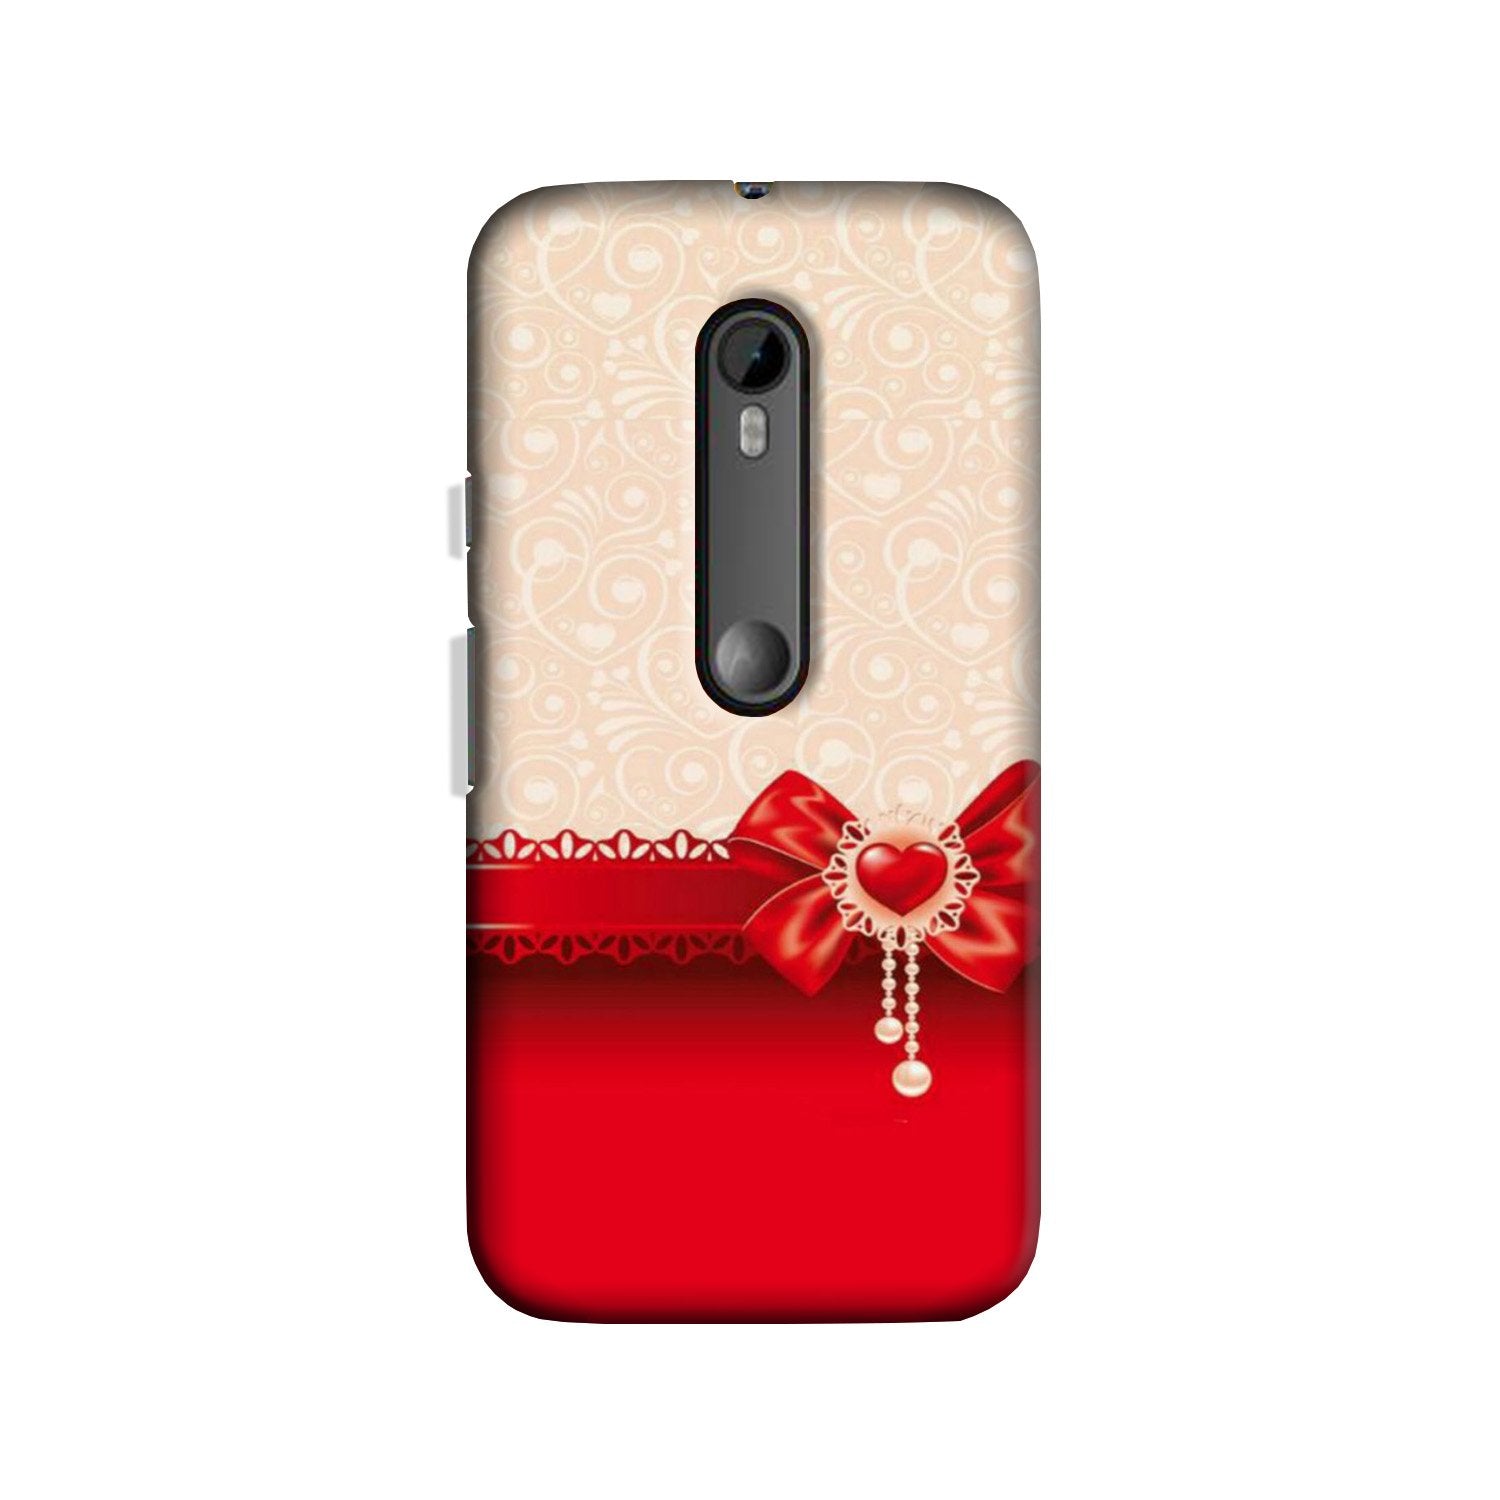 Gift Wrap3 Case for Moto X Style